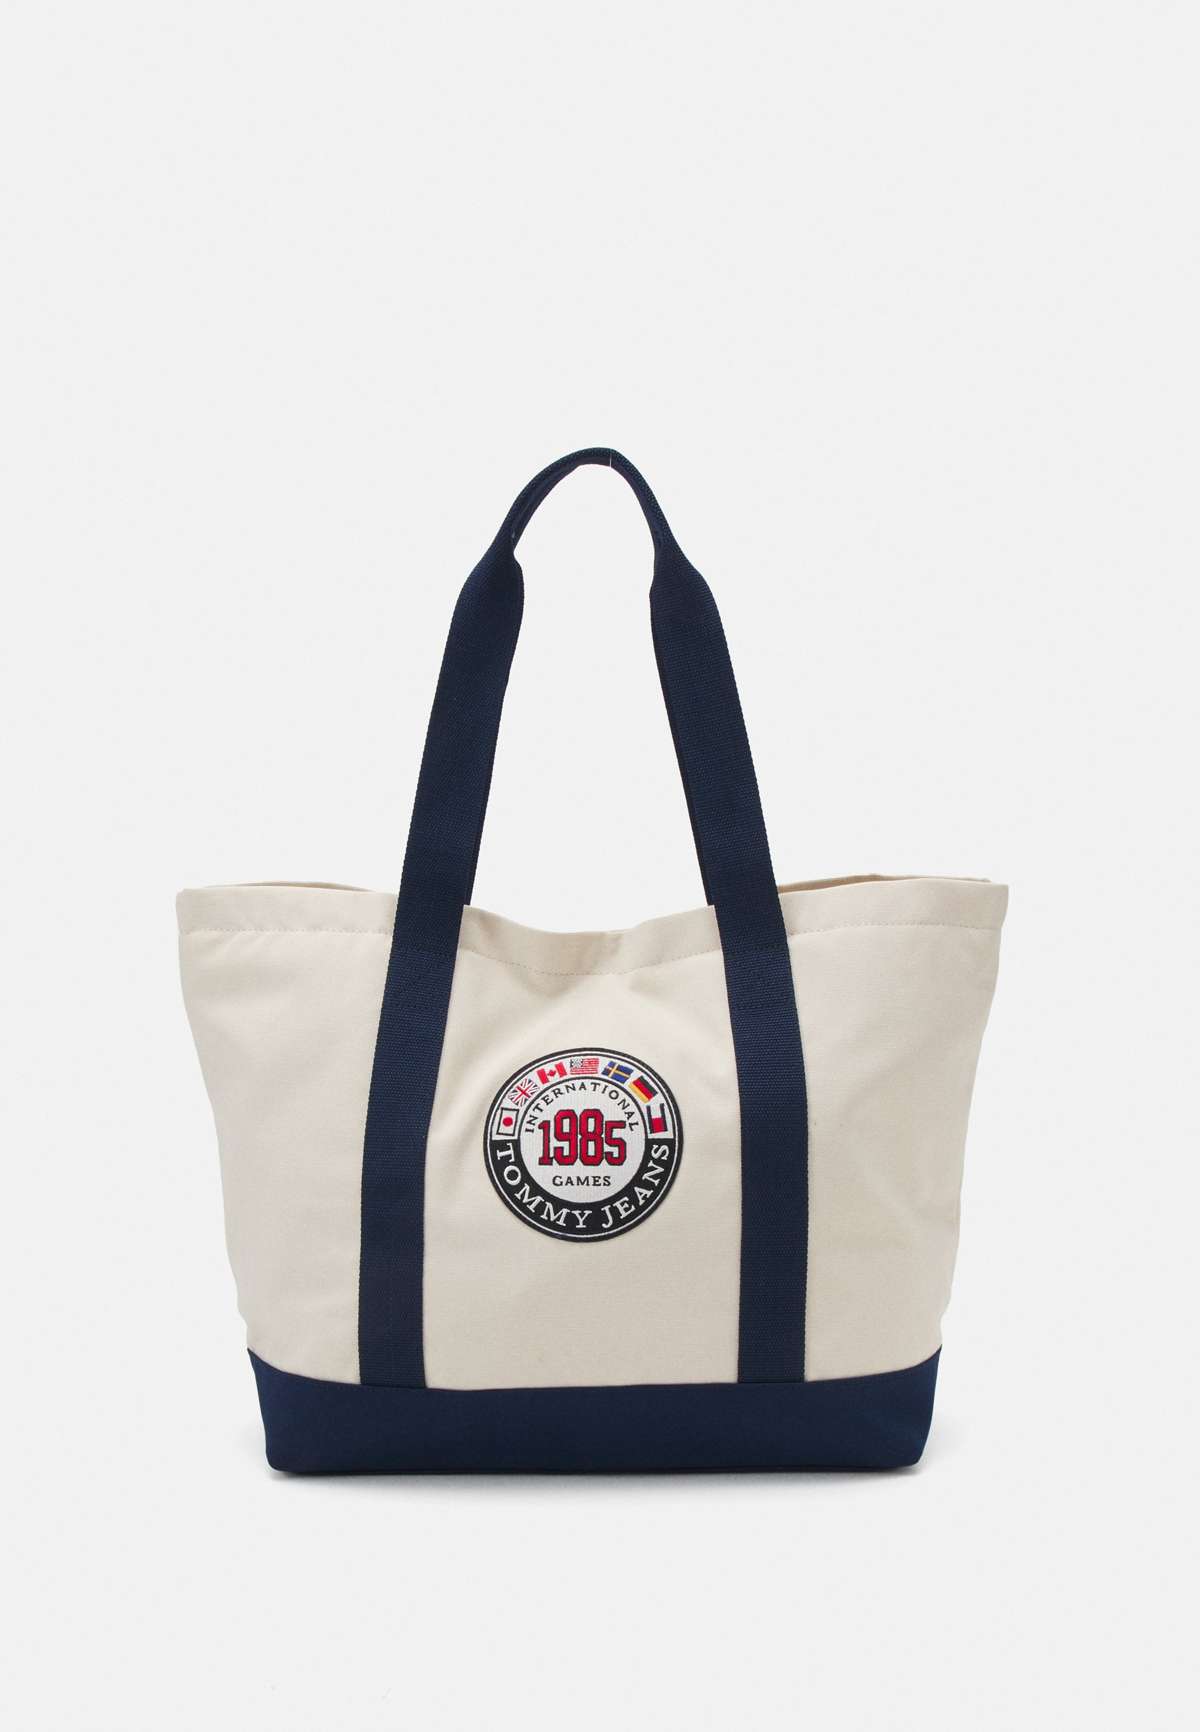 ARCHIVE GAMES TOTE UNISEX - Shopping Bag ARCHIVE GAMES TOTE UNISEX